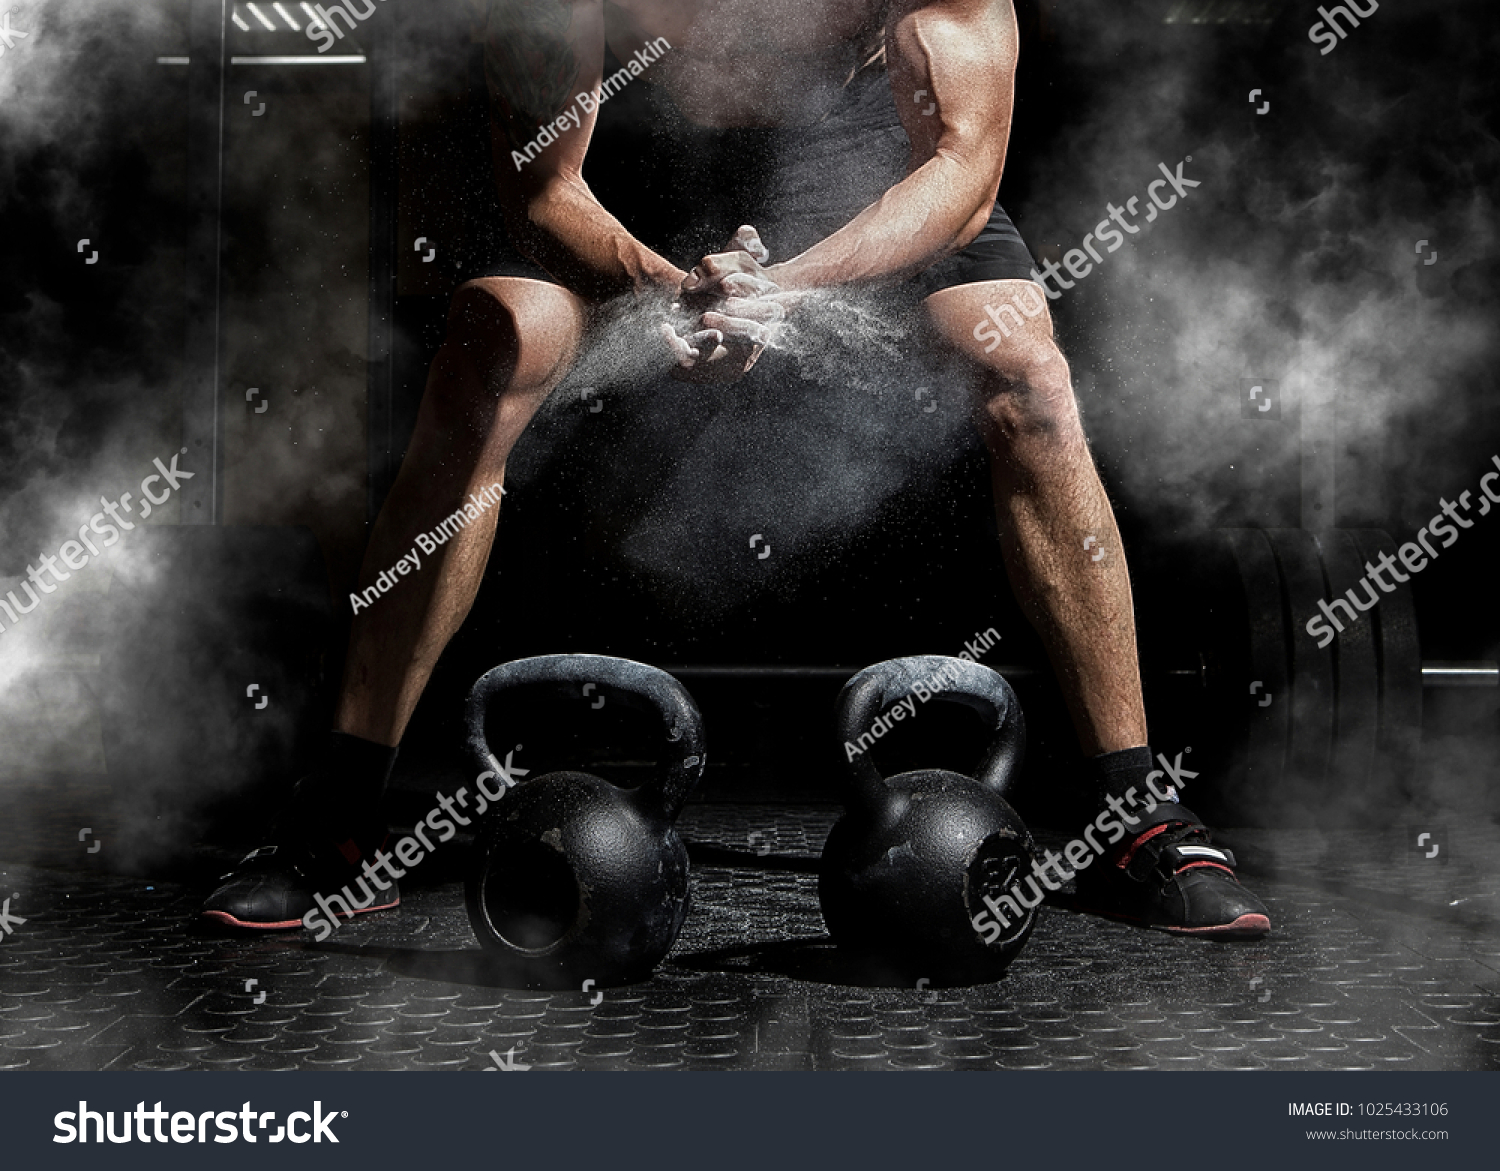 Weightlifter clapping hands and preparing for workout at a gym. Focus on dust #1025433106